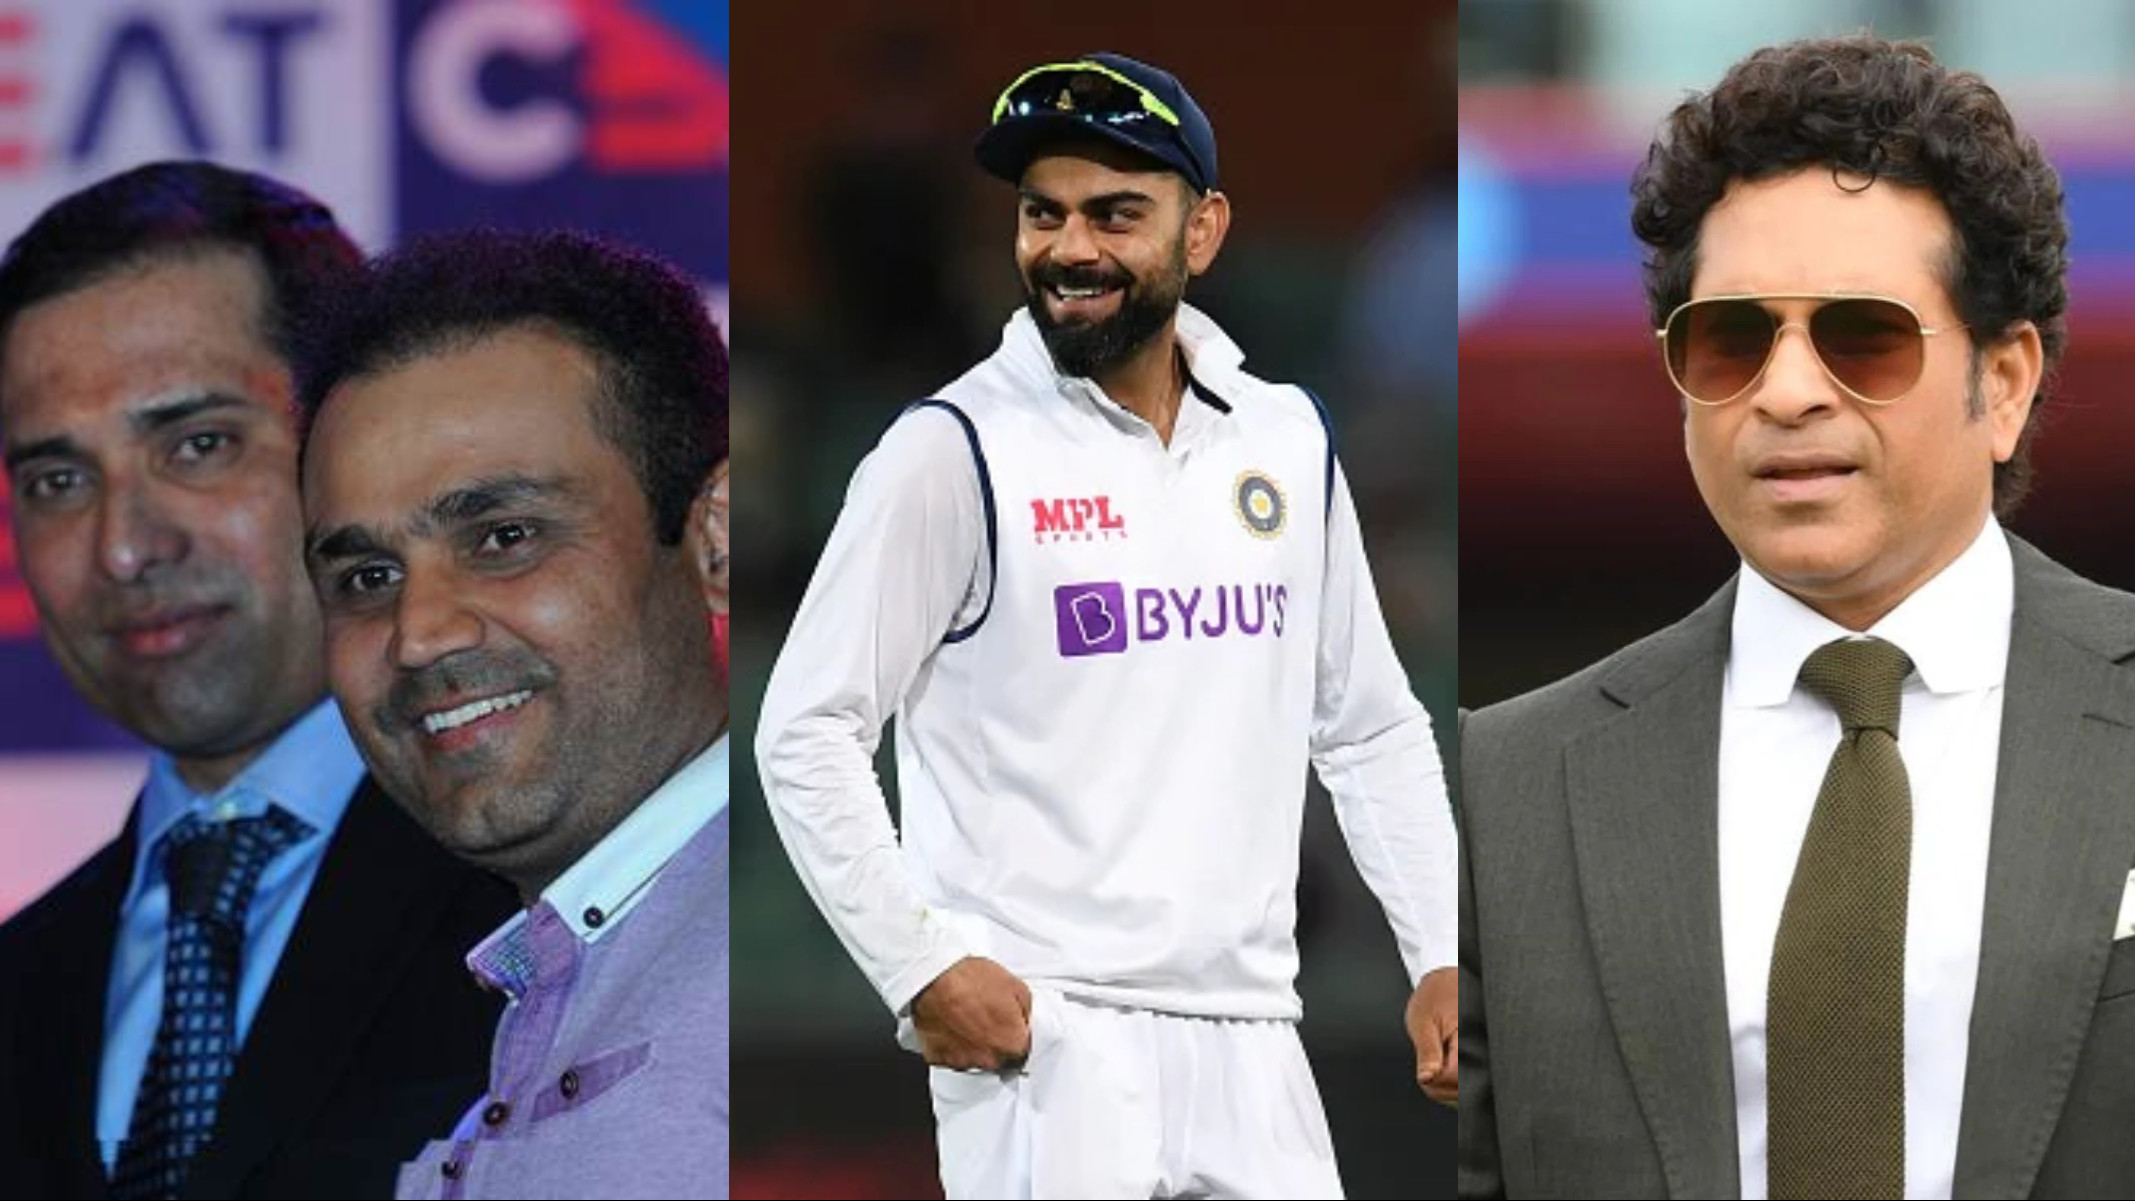 Sachin Tendulkar, VVS Laxman and Virender Sehwag pay rich tributes to Virat Kohli after he quits as India Test captain